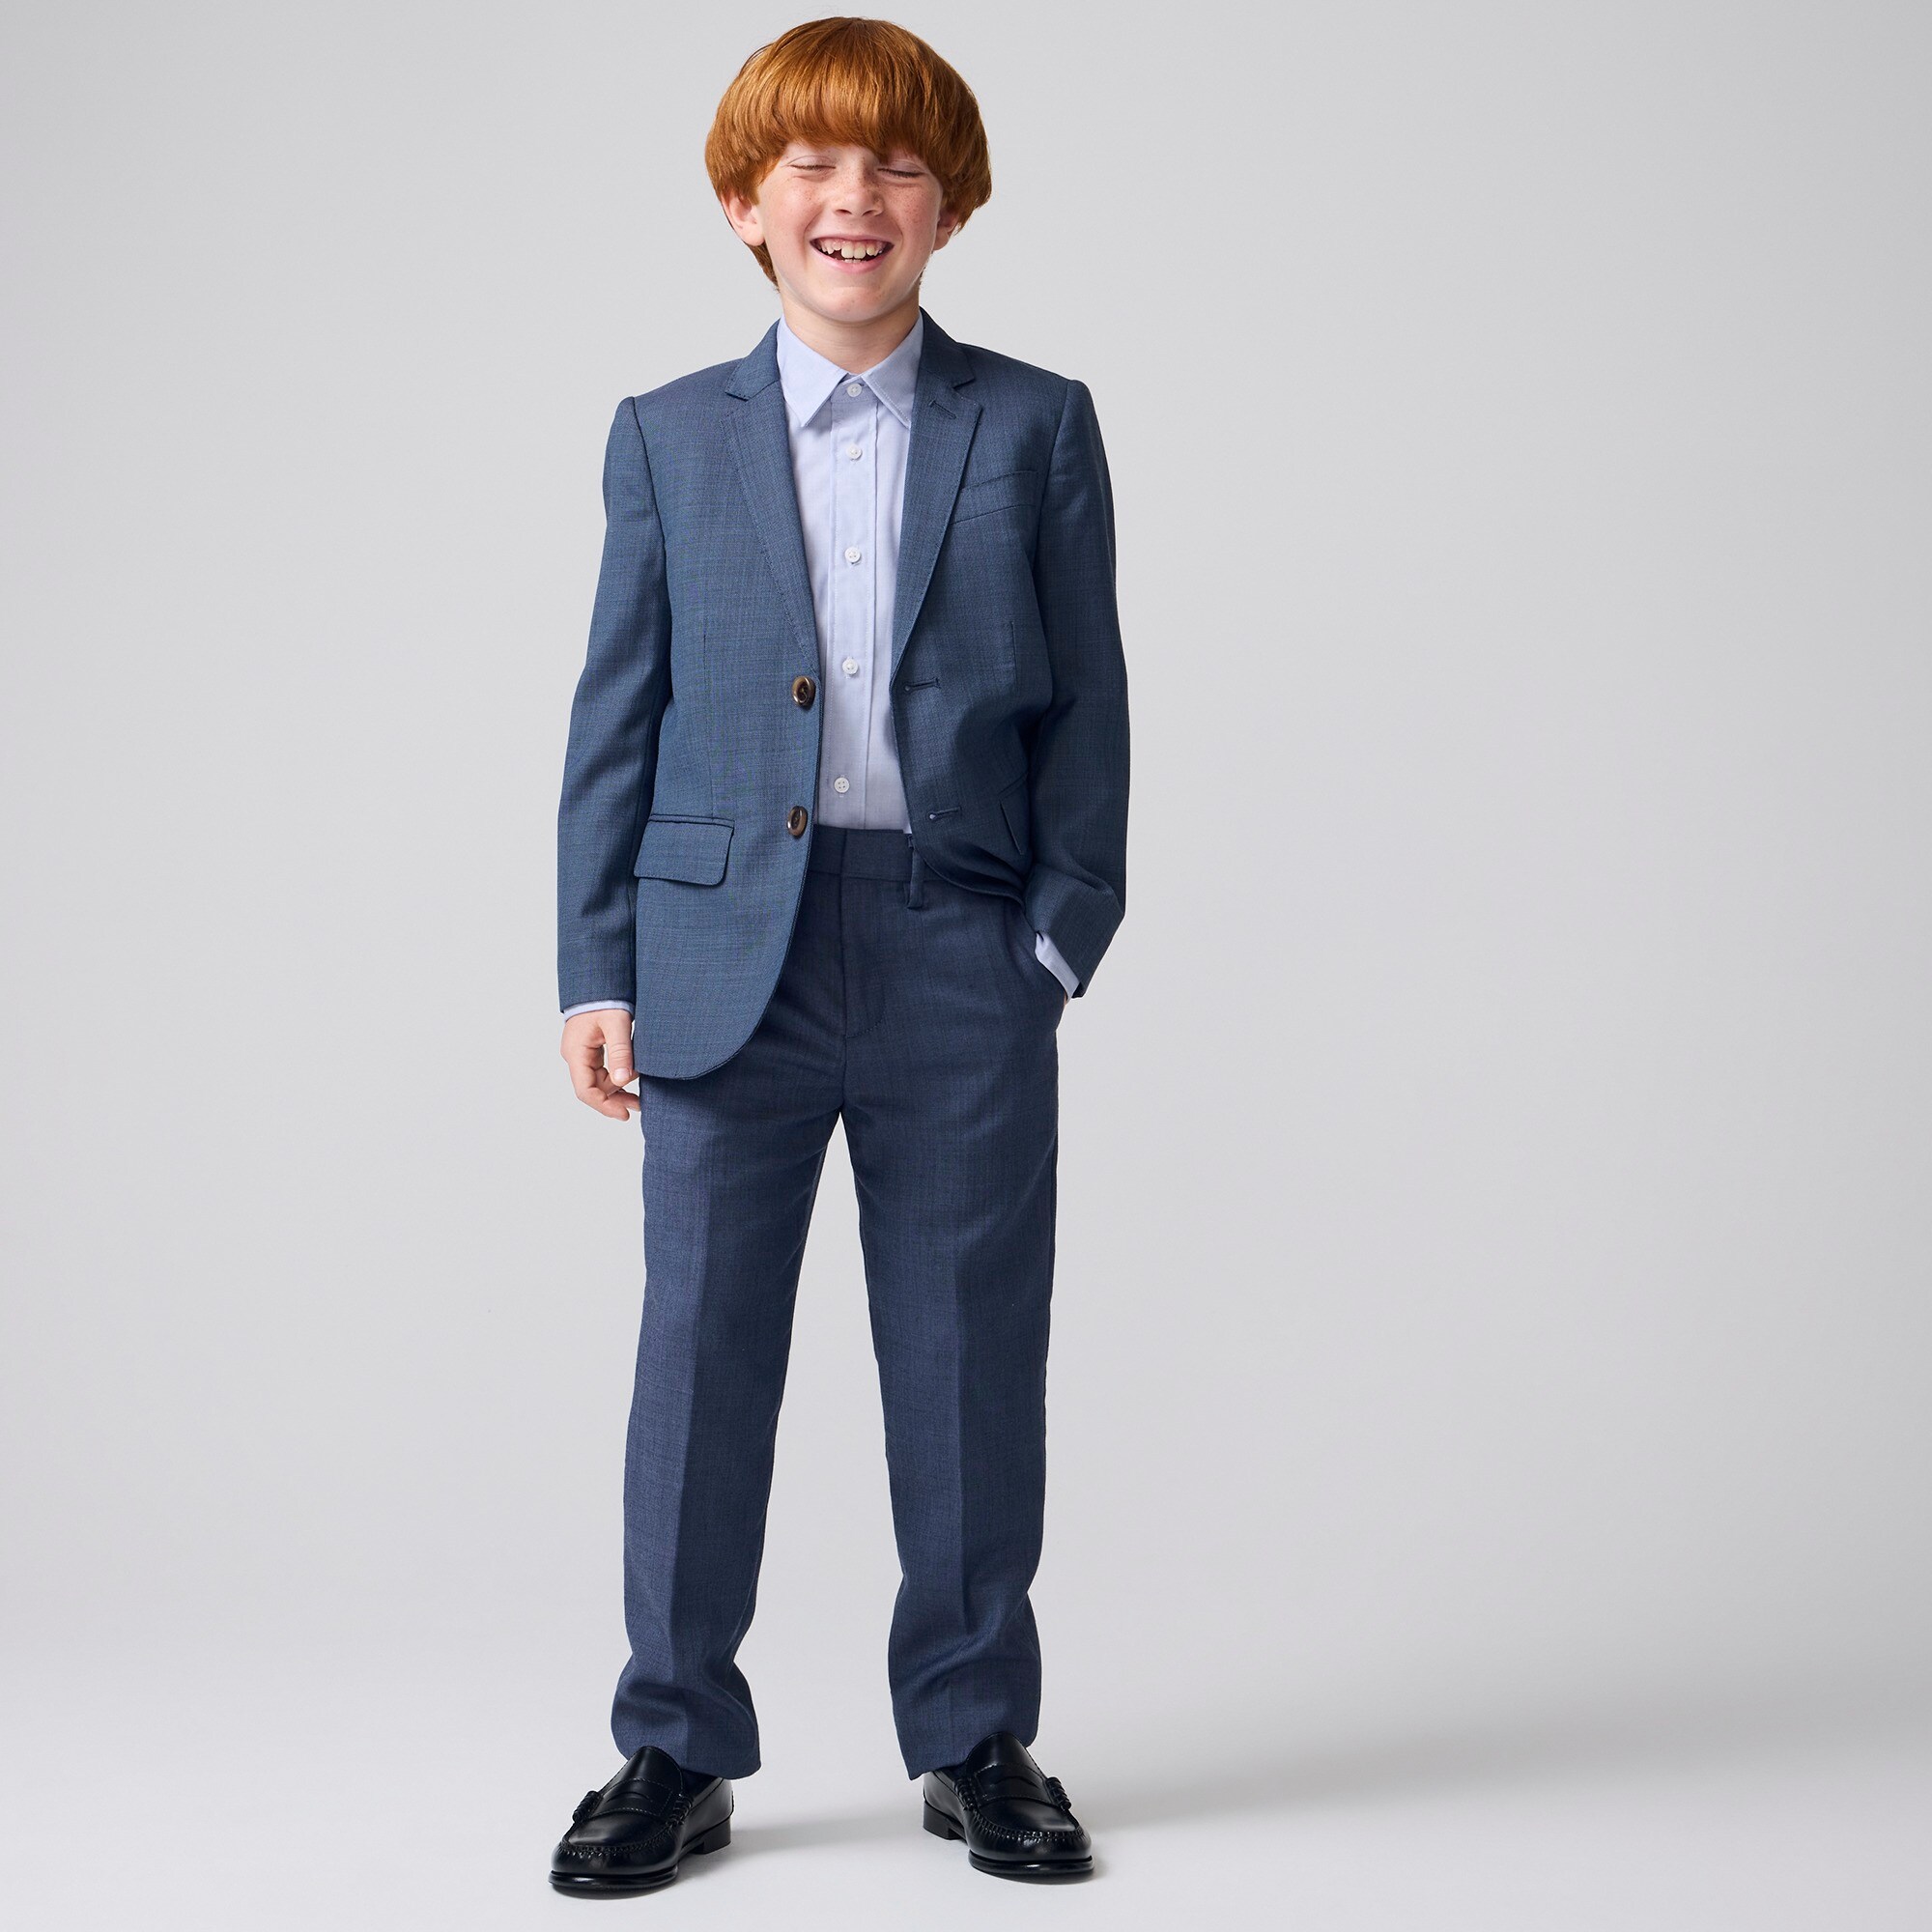  Boys' slim Ludlow suit pant in stretch worsted wool blend